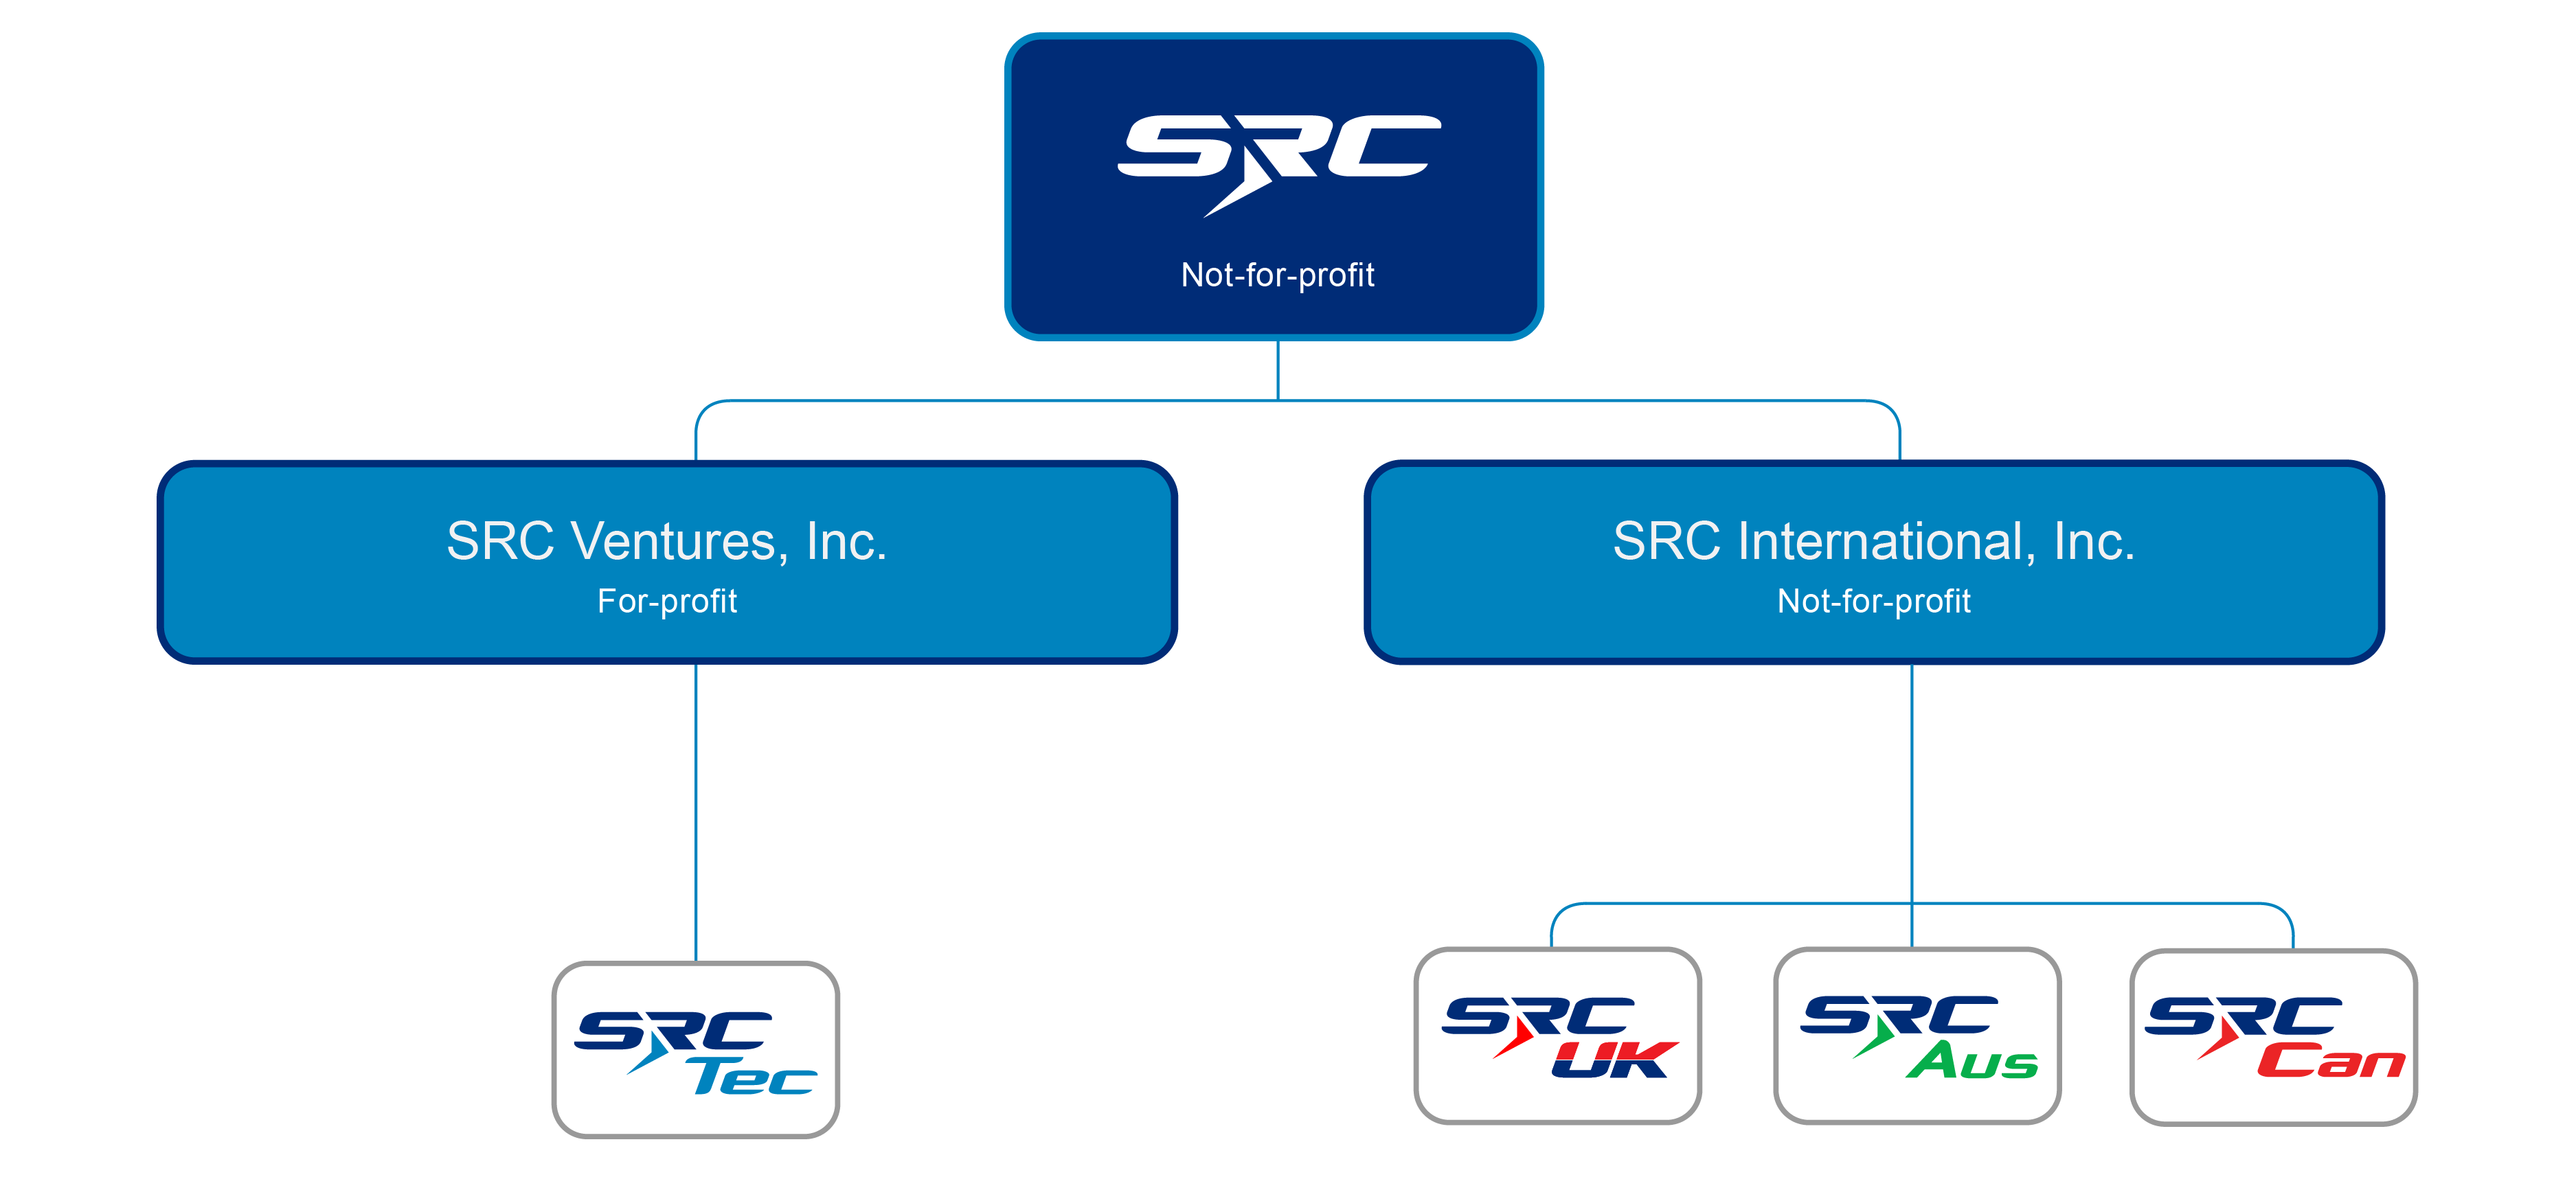 SRC subsidiaries organizational structure